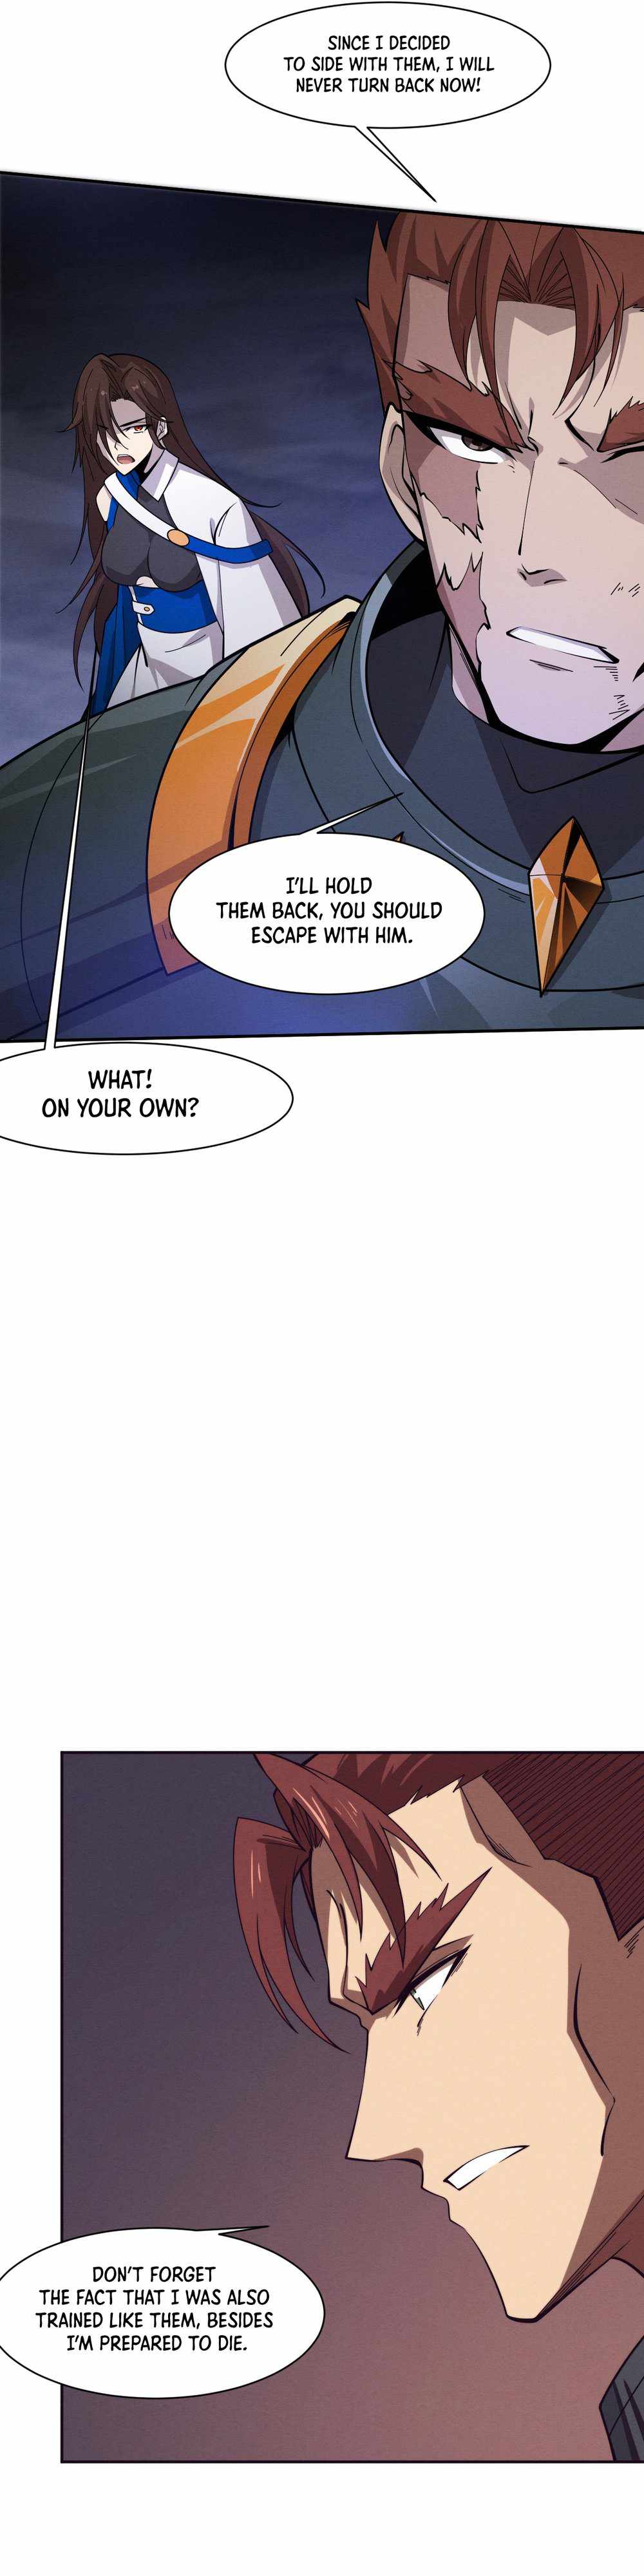 Evolution frenzy Chapter 149-eng-li - Page 3